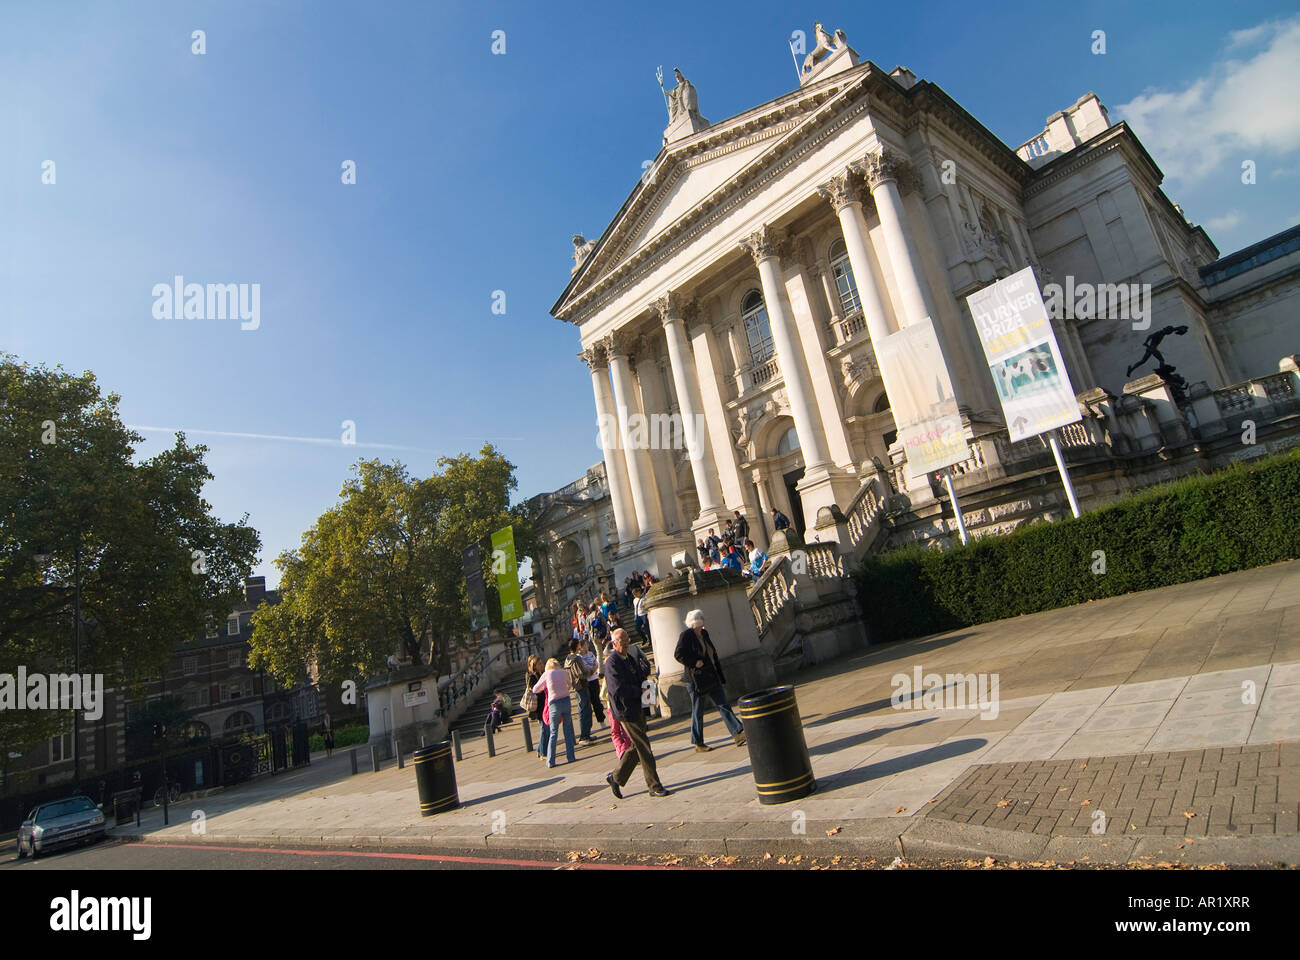 Horizontal angular wide angle of tourists outside the front entrance of the Tate Britain Gallery on a bright sunny day. Stock Photo